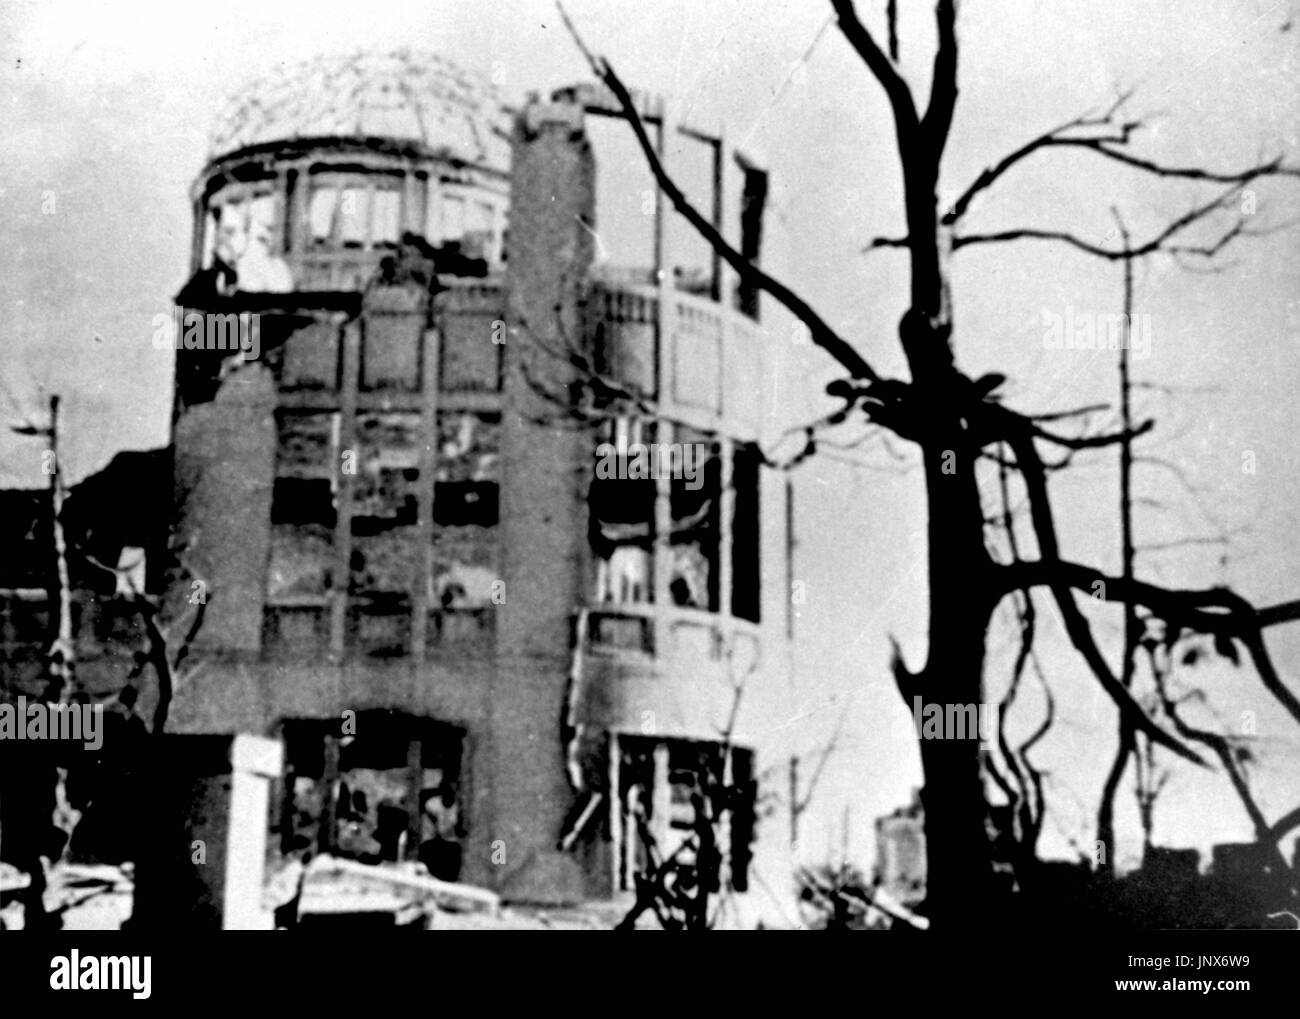 HIROSHIMA, Japan - This file photo shows an area near the Atomic Bomb Dome at the epicenter of the U.S. atomic bombing on Hiroshima. The photo was taken on Aug. 6, 1945. (Kyodo) Stock Photo